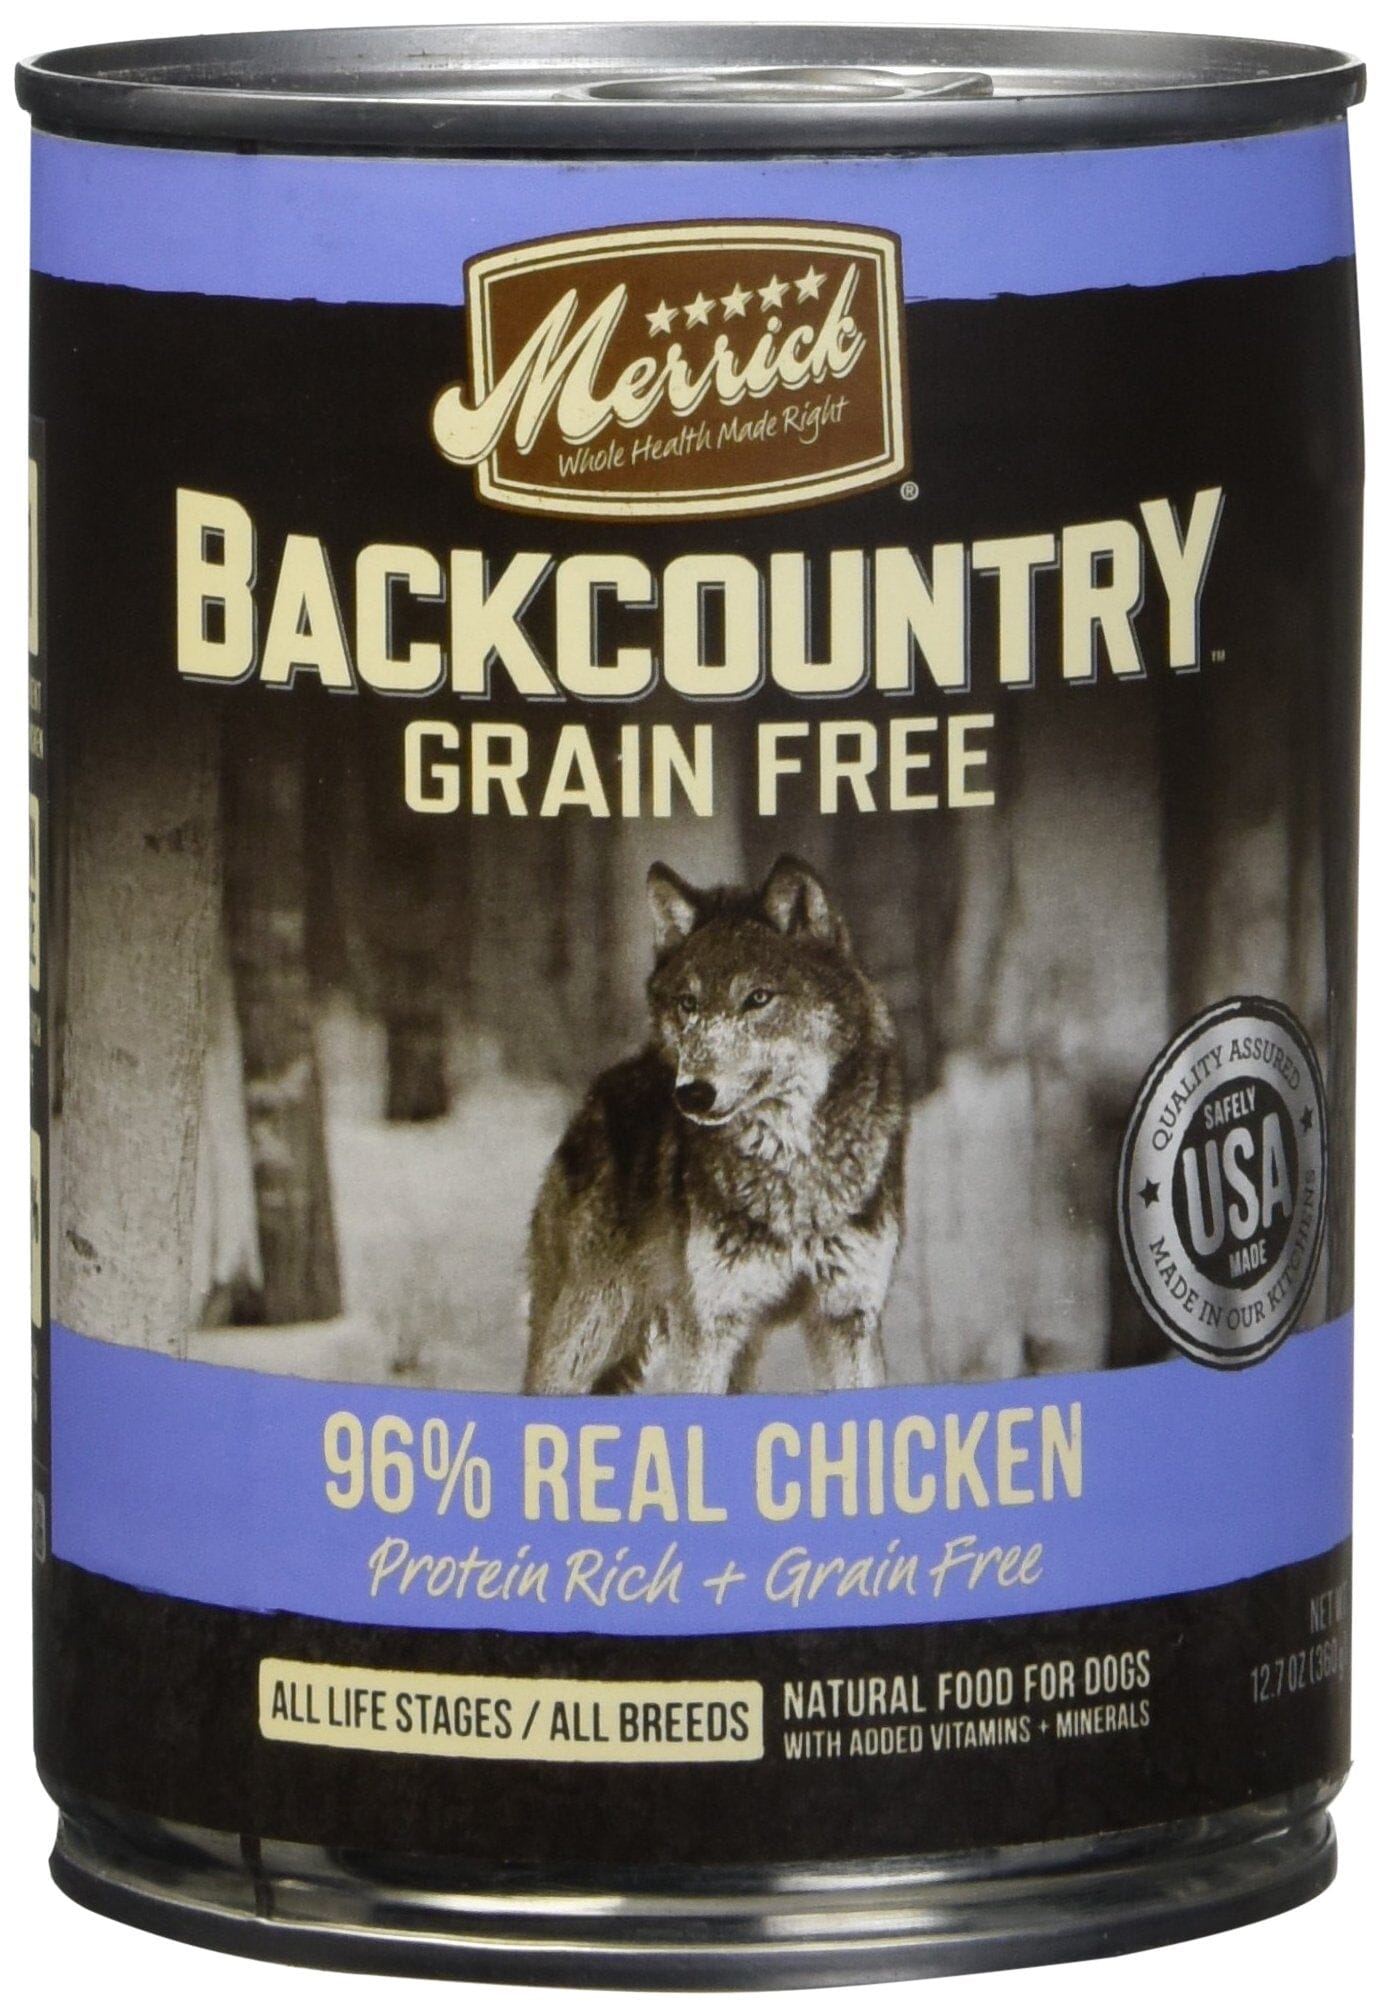 Merrick Backcountry Real Chicken Recipe Canned Dog Food - 12.7 Oz - Case of 12  